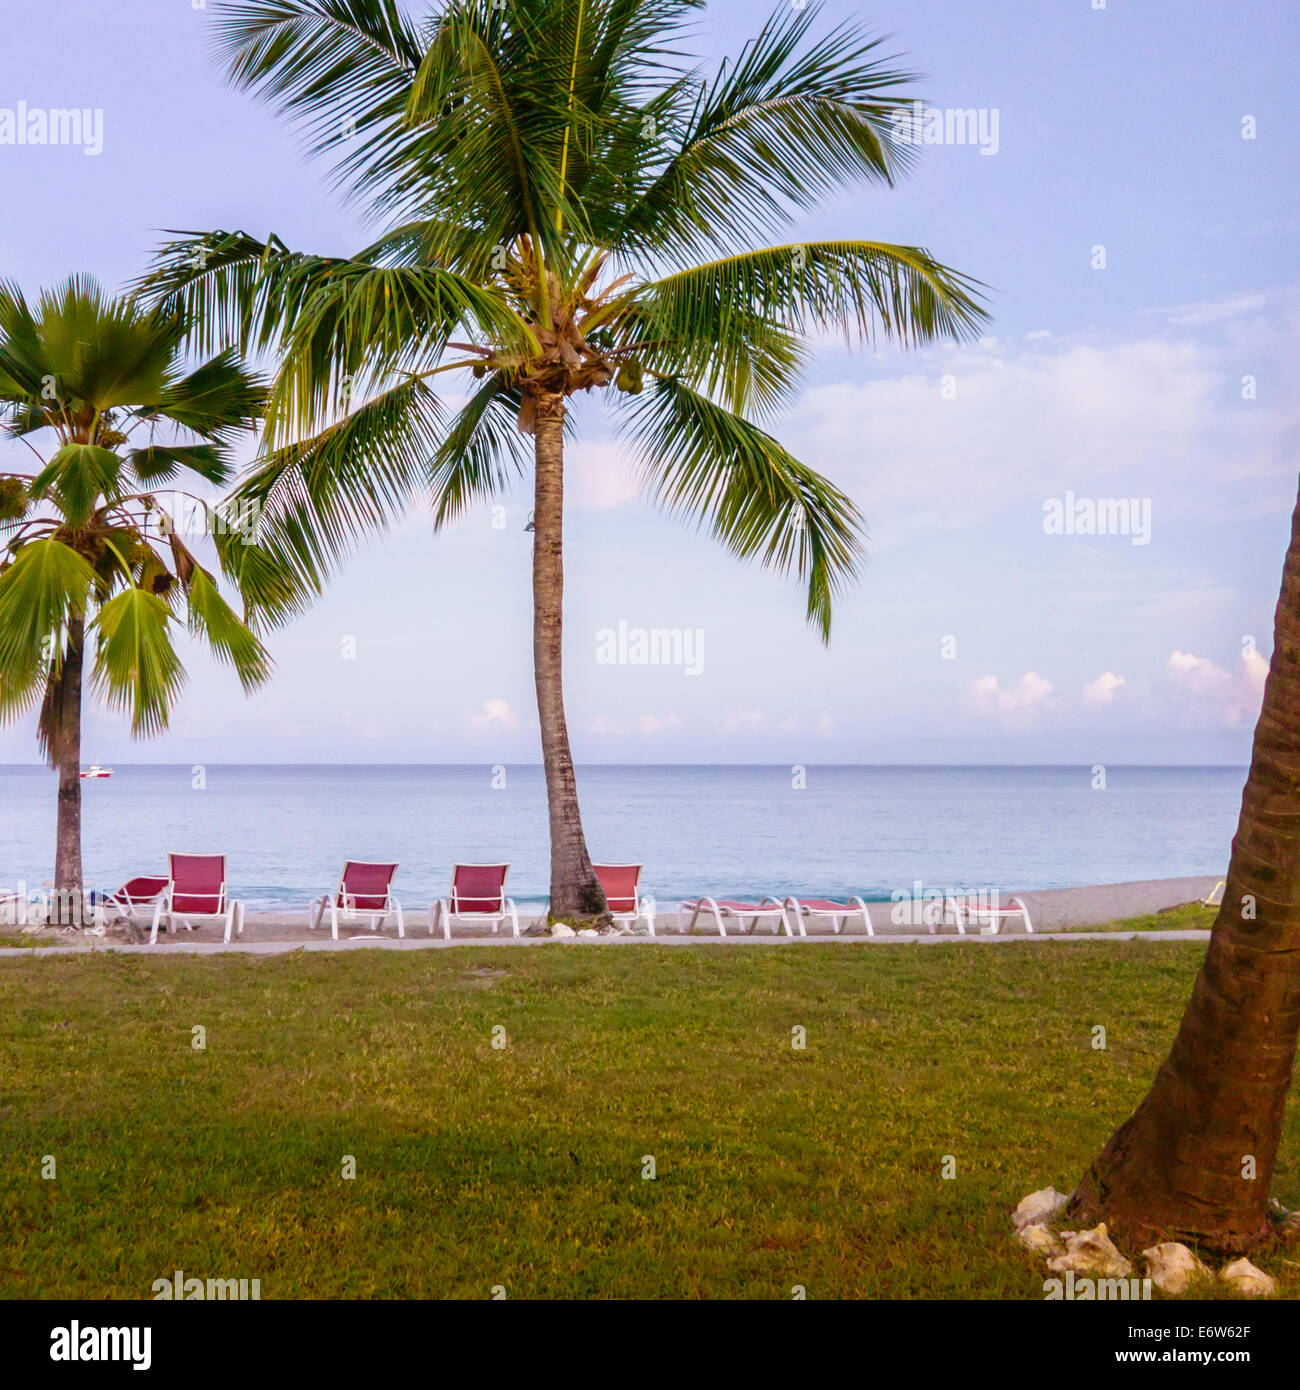 Coconut palms on the Caribbean beach at St. Croix, U. S. Virgin Islands showing lawn and calm waters. US Virgin Islands, USVI, U.S.V.I. Stock Photo